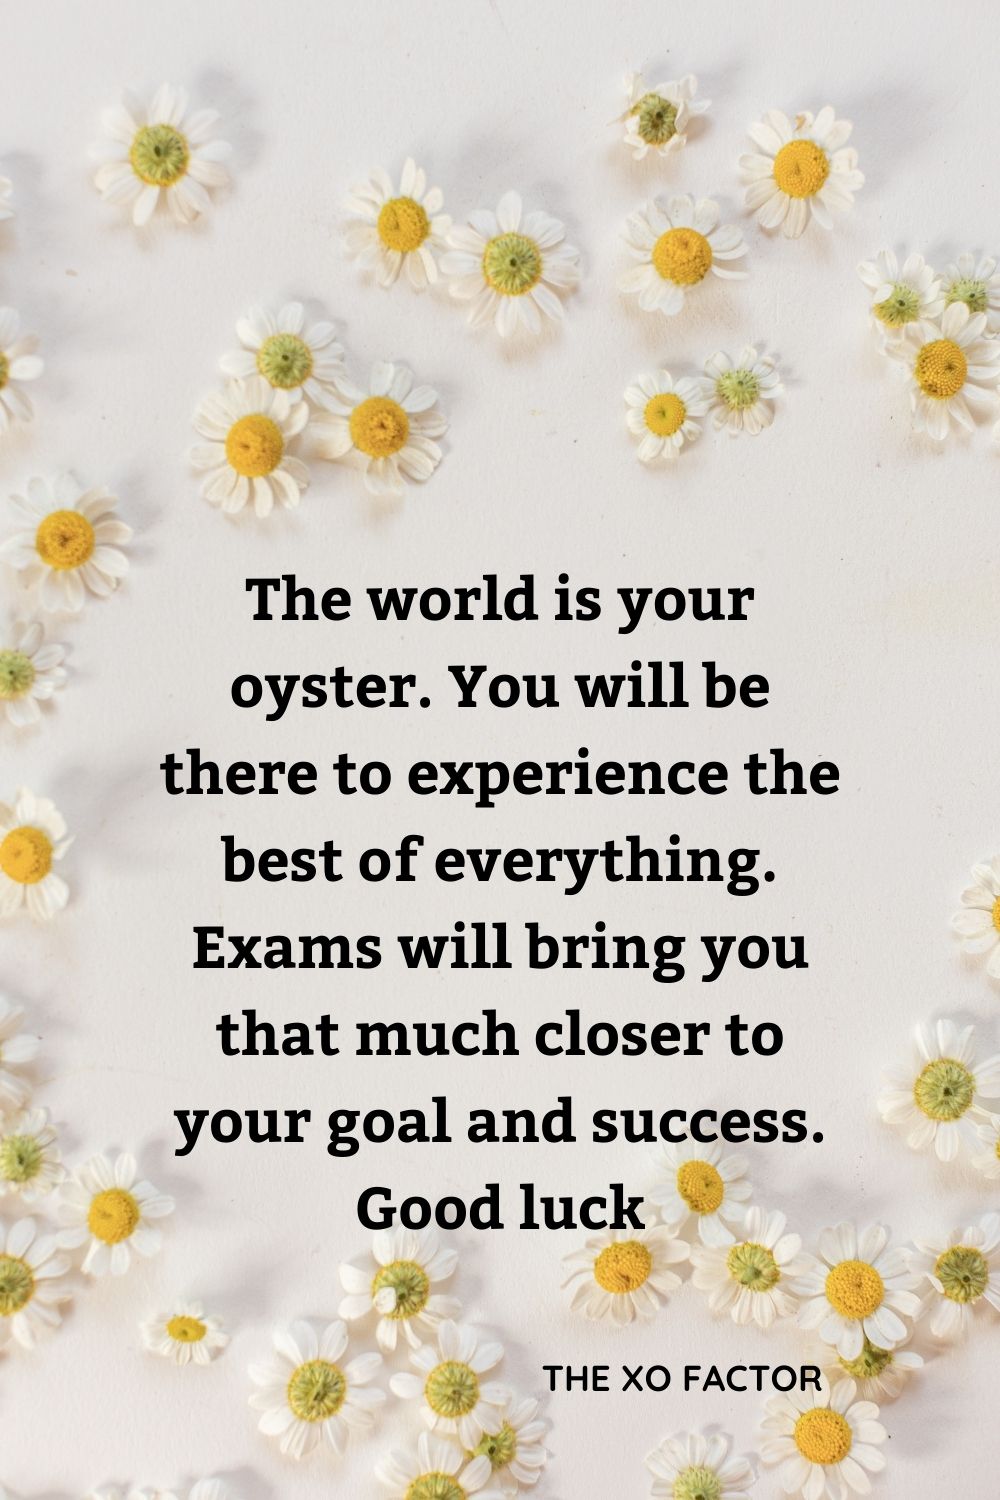 The world is your oyster. You will be there to experience the best of everything. Exams will bring you that much closer to your goal and success. Good luck